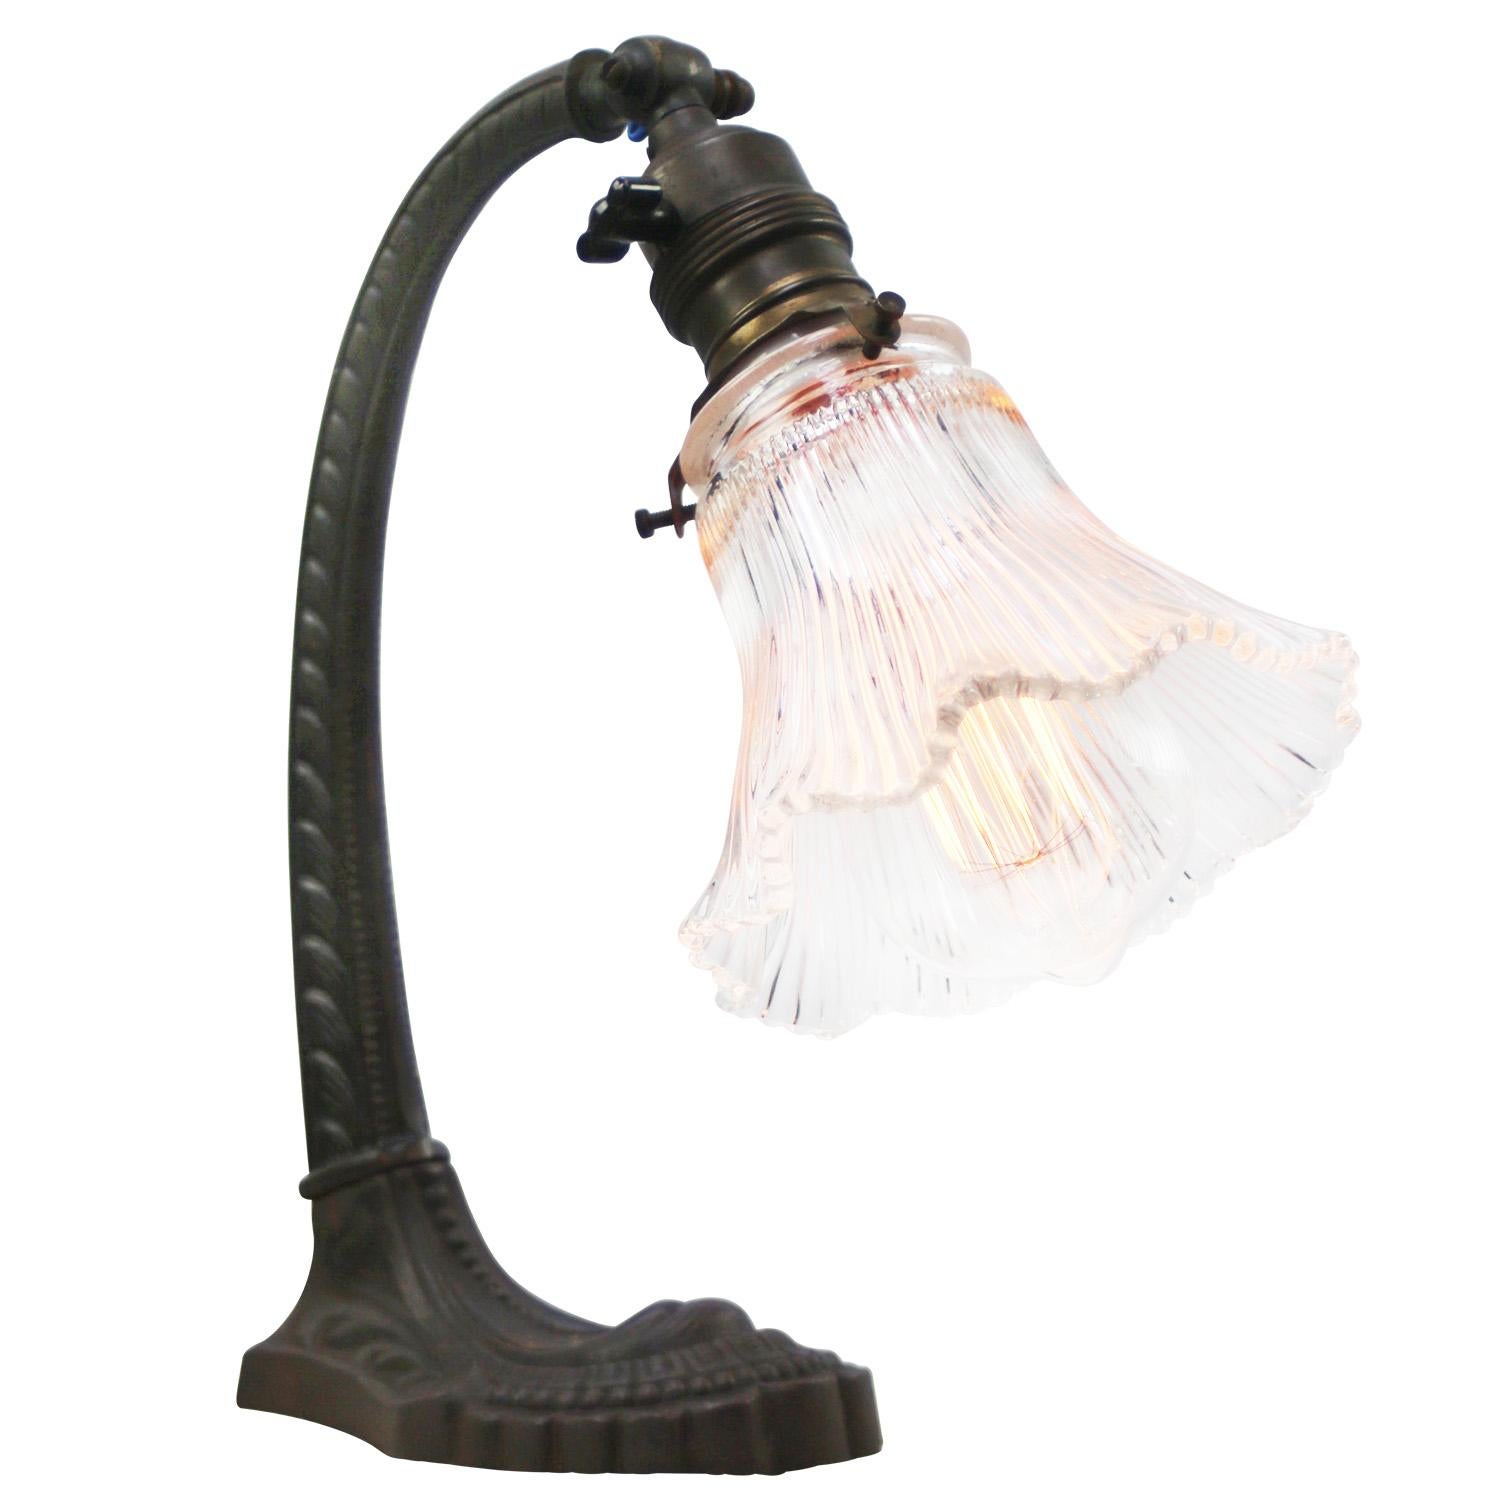 French 1920s desk light.
Cast Iron Base and arm with Holophane glass shade.
Black cotton wire and plug.

Also, available with US/UK plug

Priced per individual item. All lamps have been made suitable by international standards for incandescent light